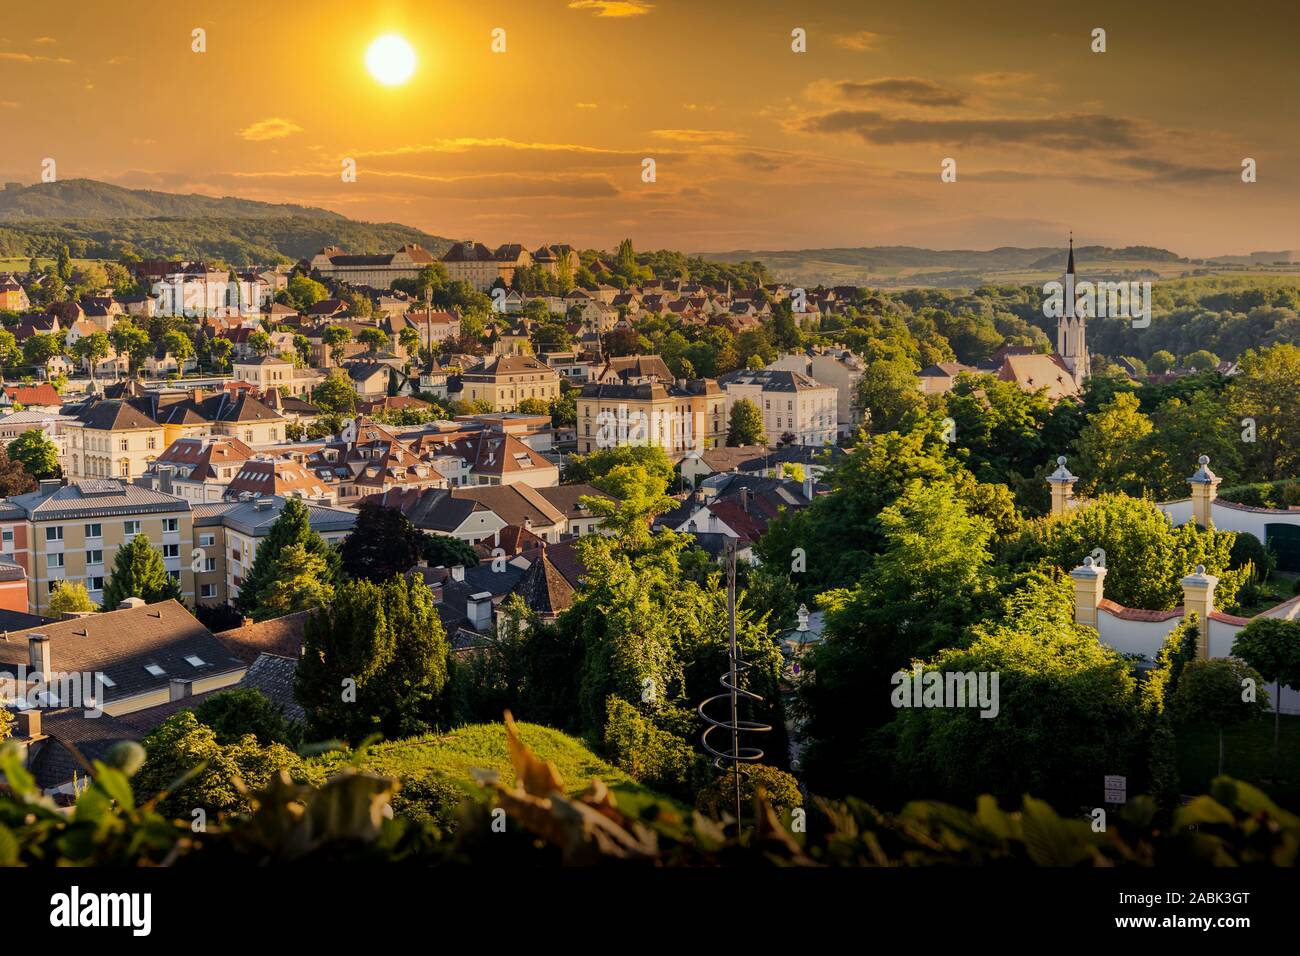 View of the buildings and roofs of the picturesque town of Melk on a sunset, Lower Austria, Wachau Valley. Stock Photo